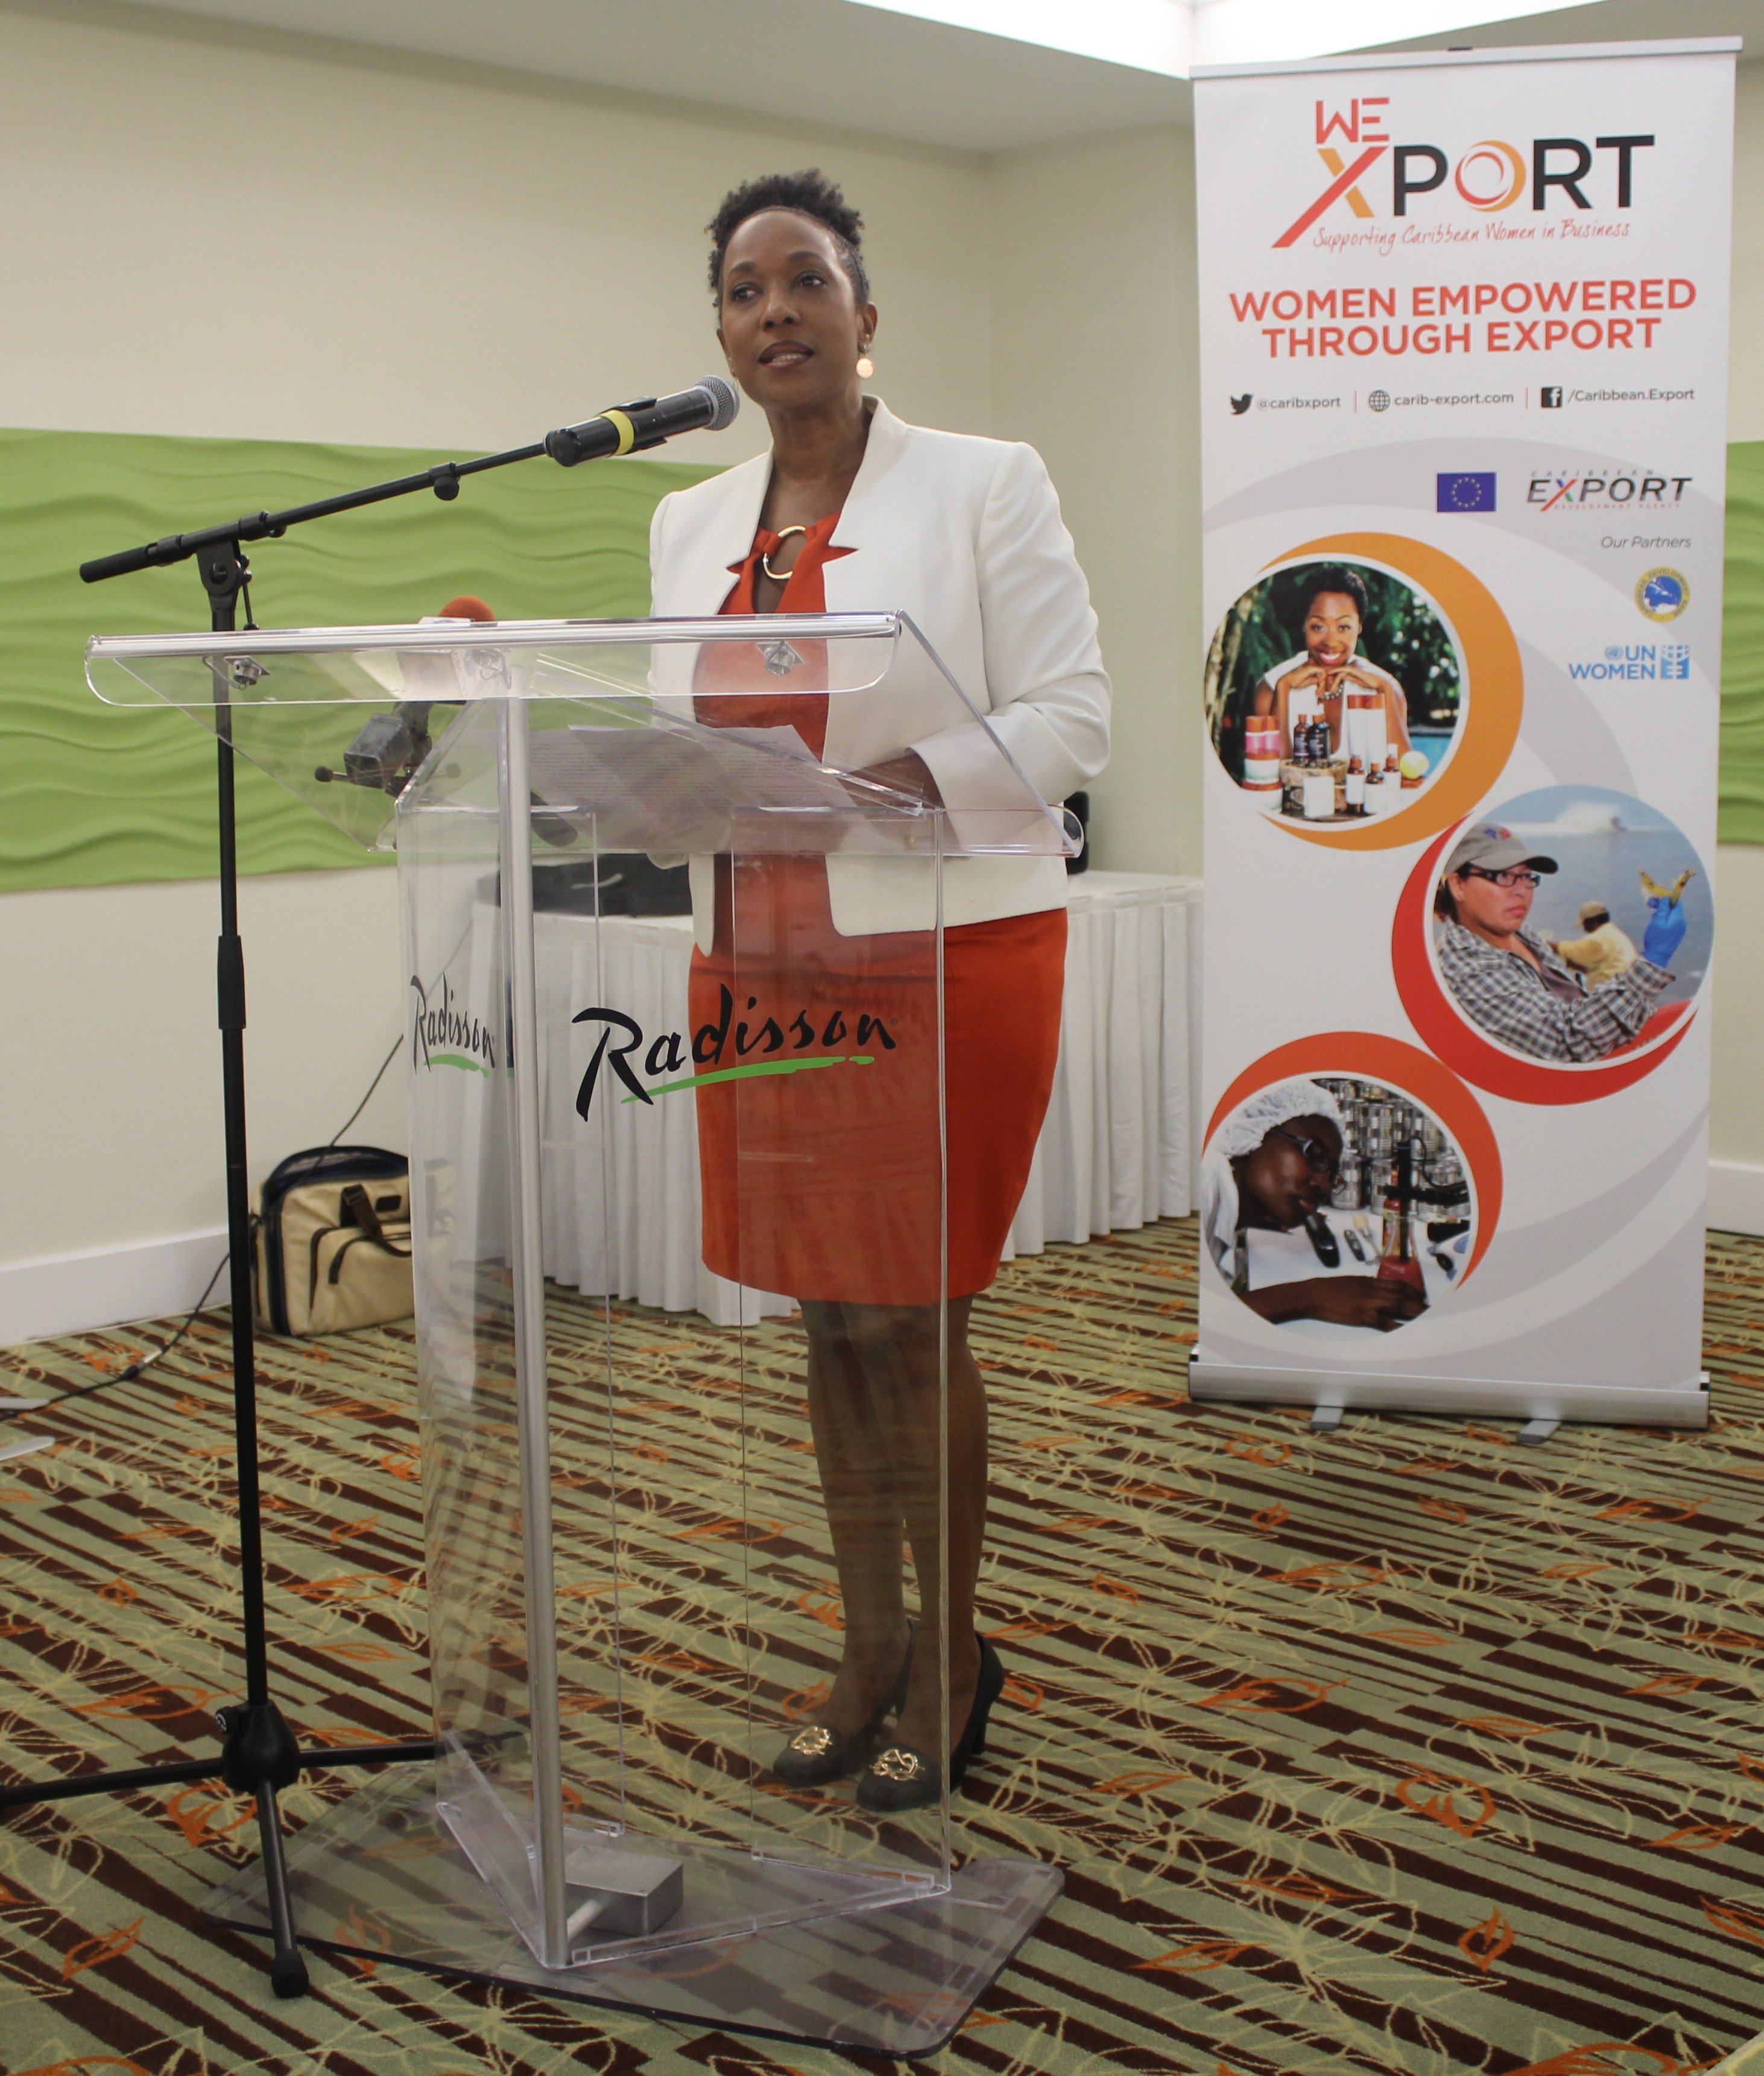 Pamela Coke-Hamilton, Executive Director, Caribbean Export, delivers opening remarks during the WE-Xport Access to Finance Workshop.